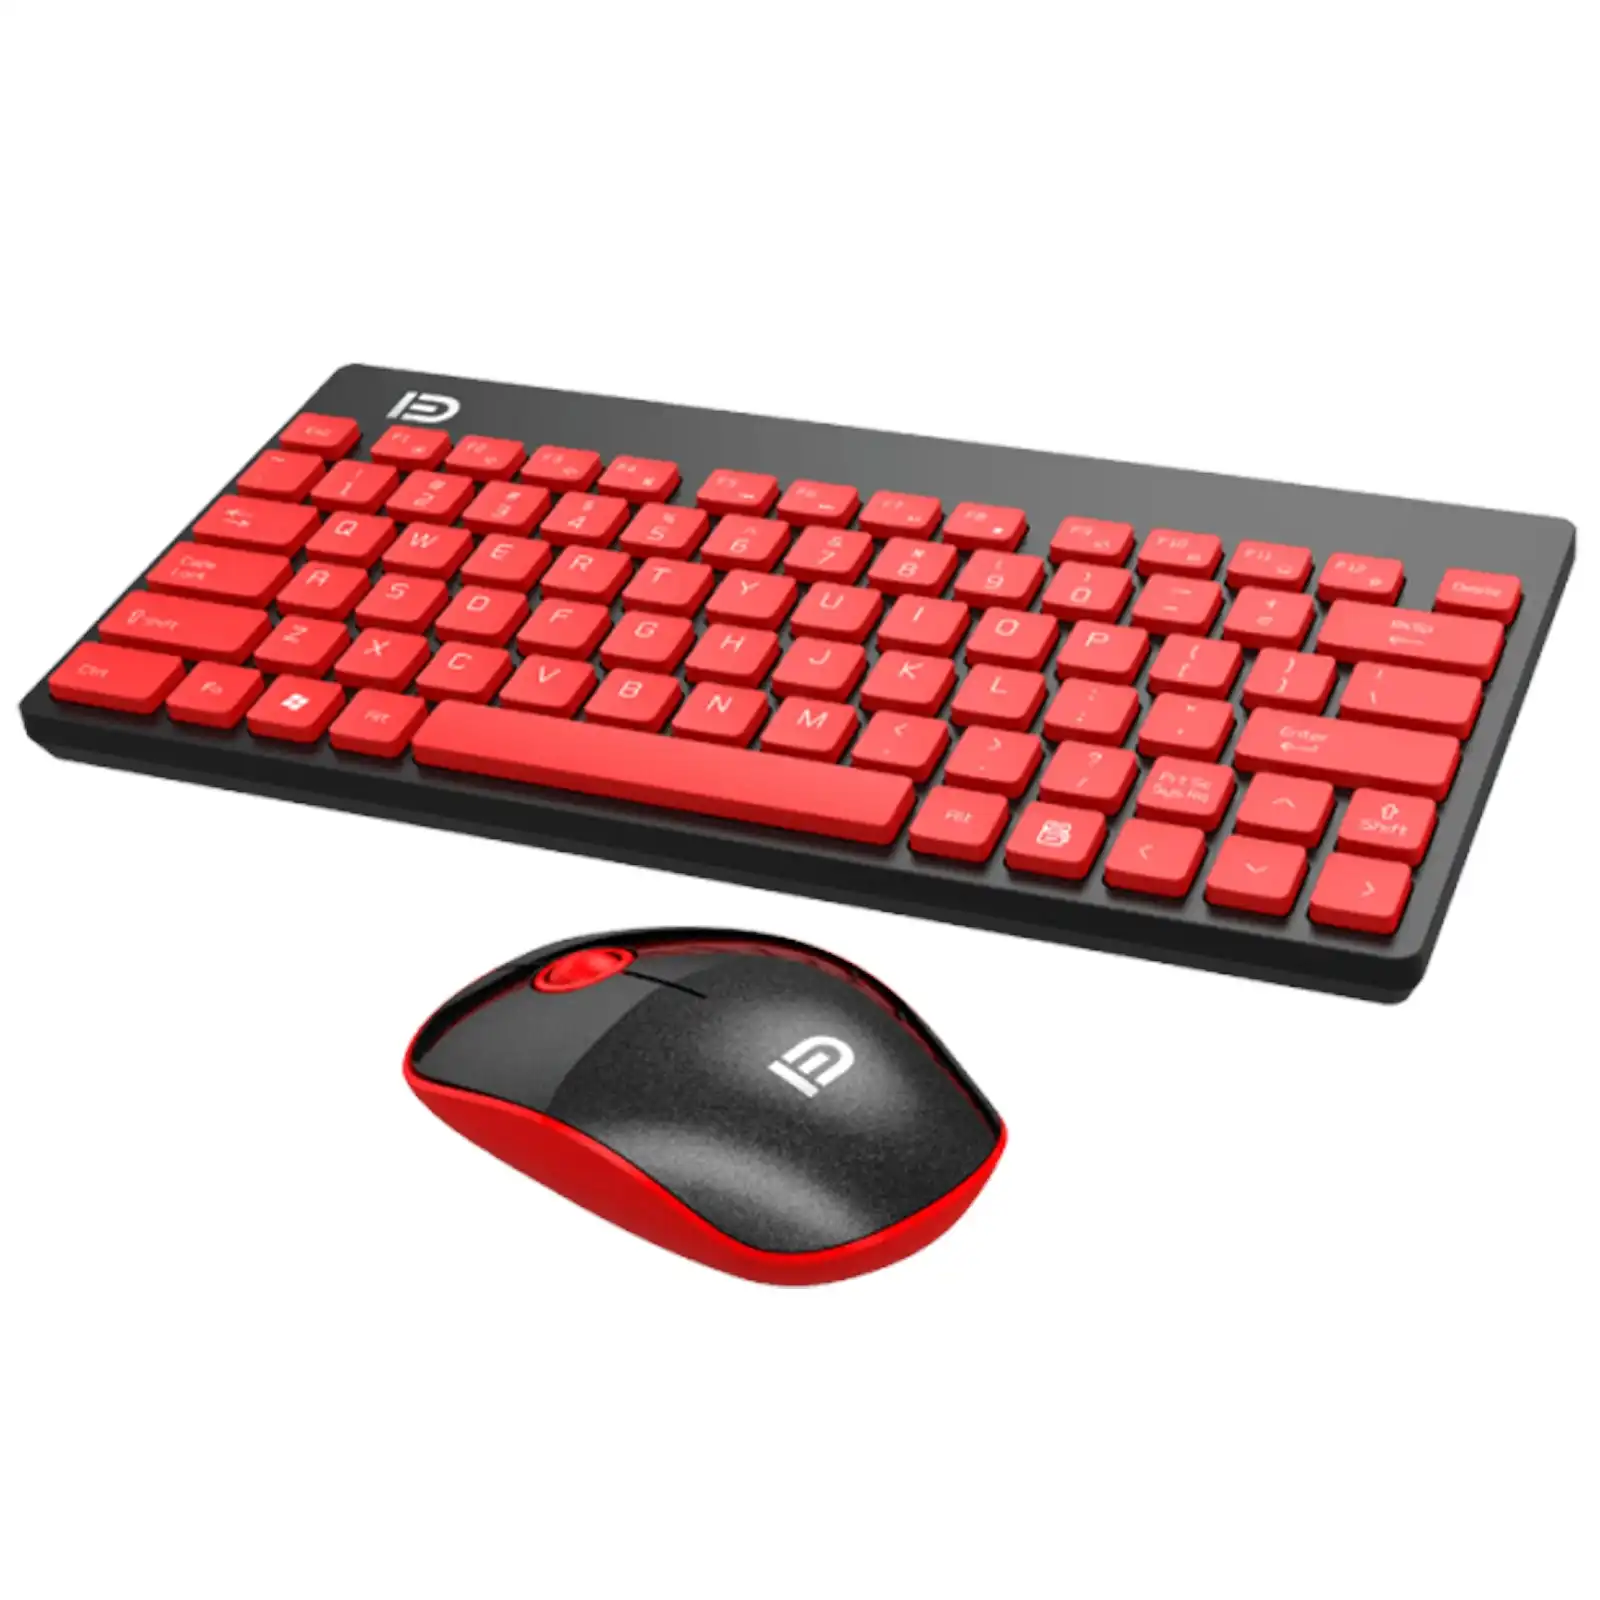 TODO 2.4Ghz Wireless Keyboard Optical Mouse Combo Mac Windows Android - Red